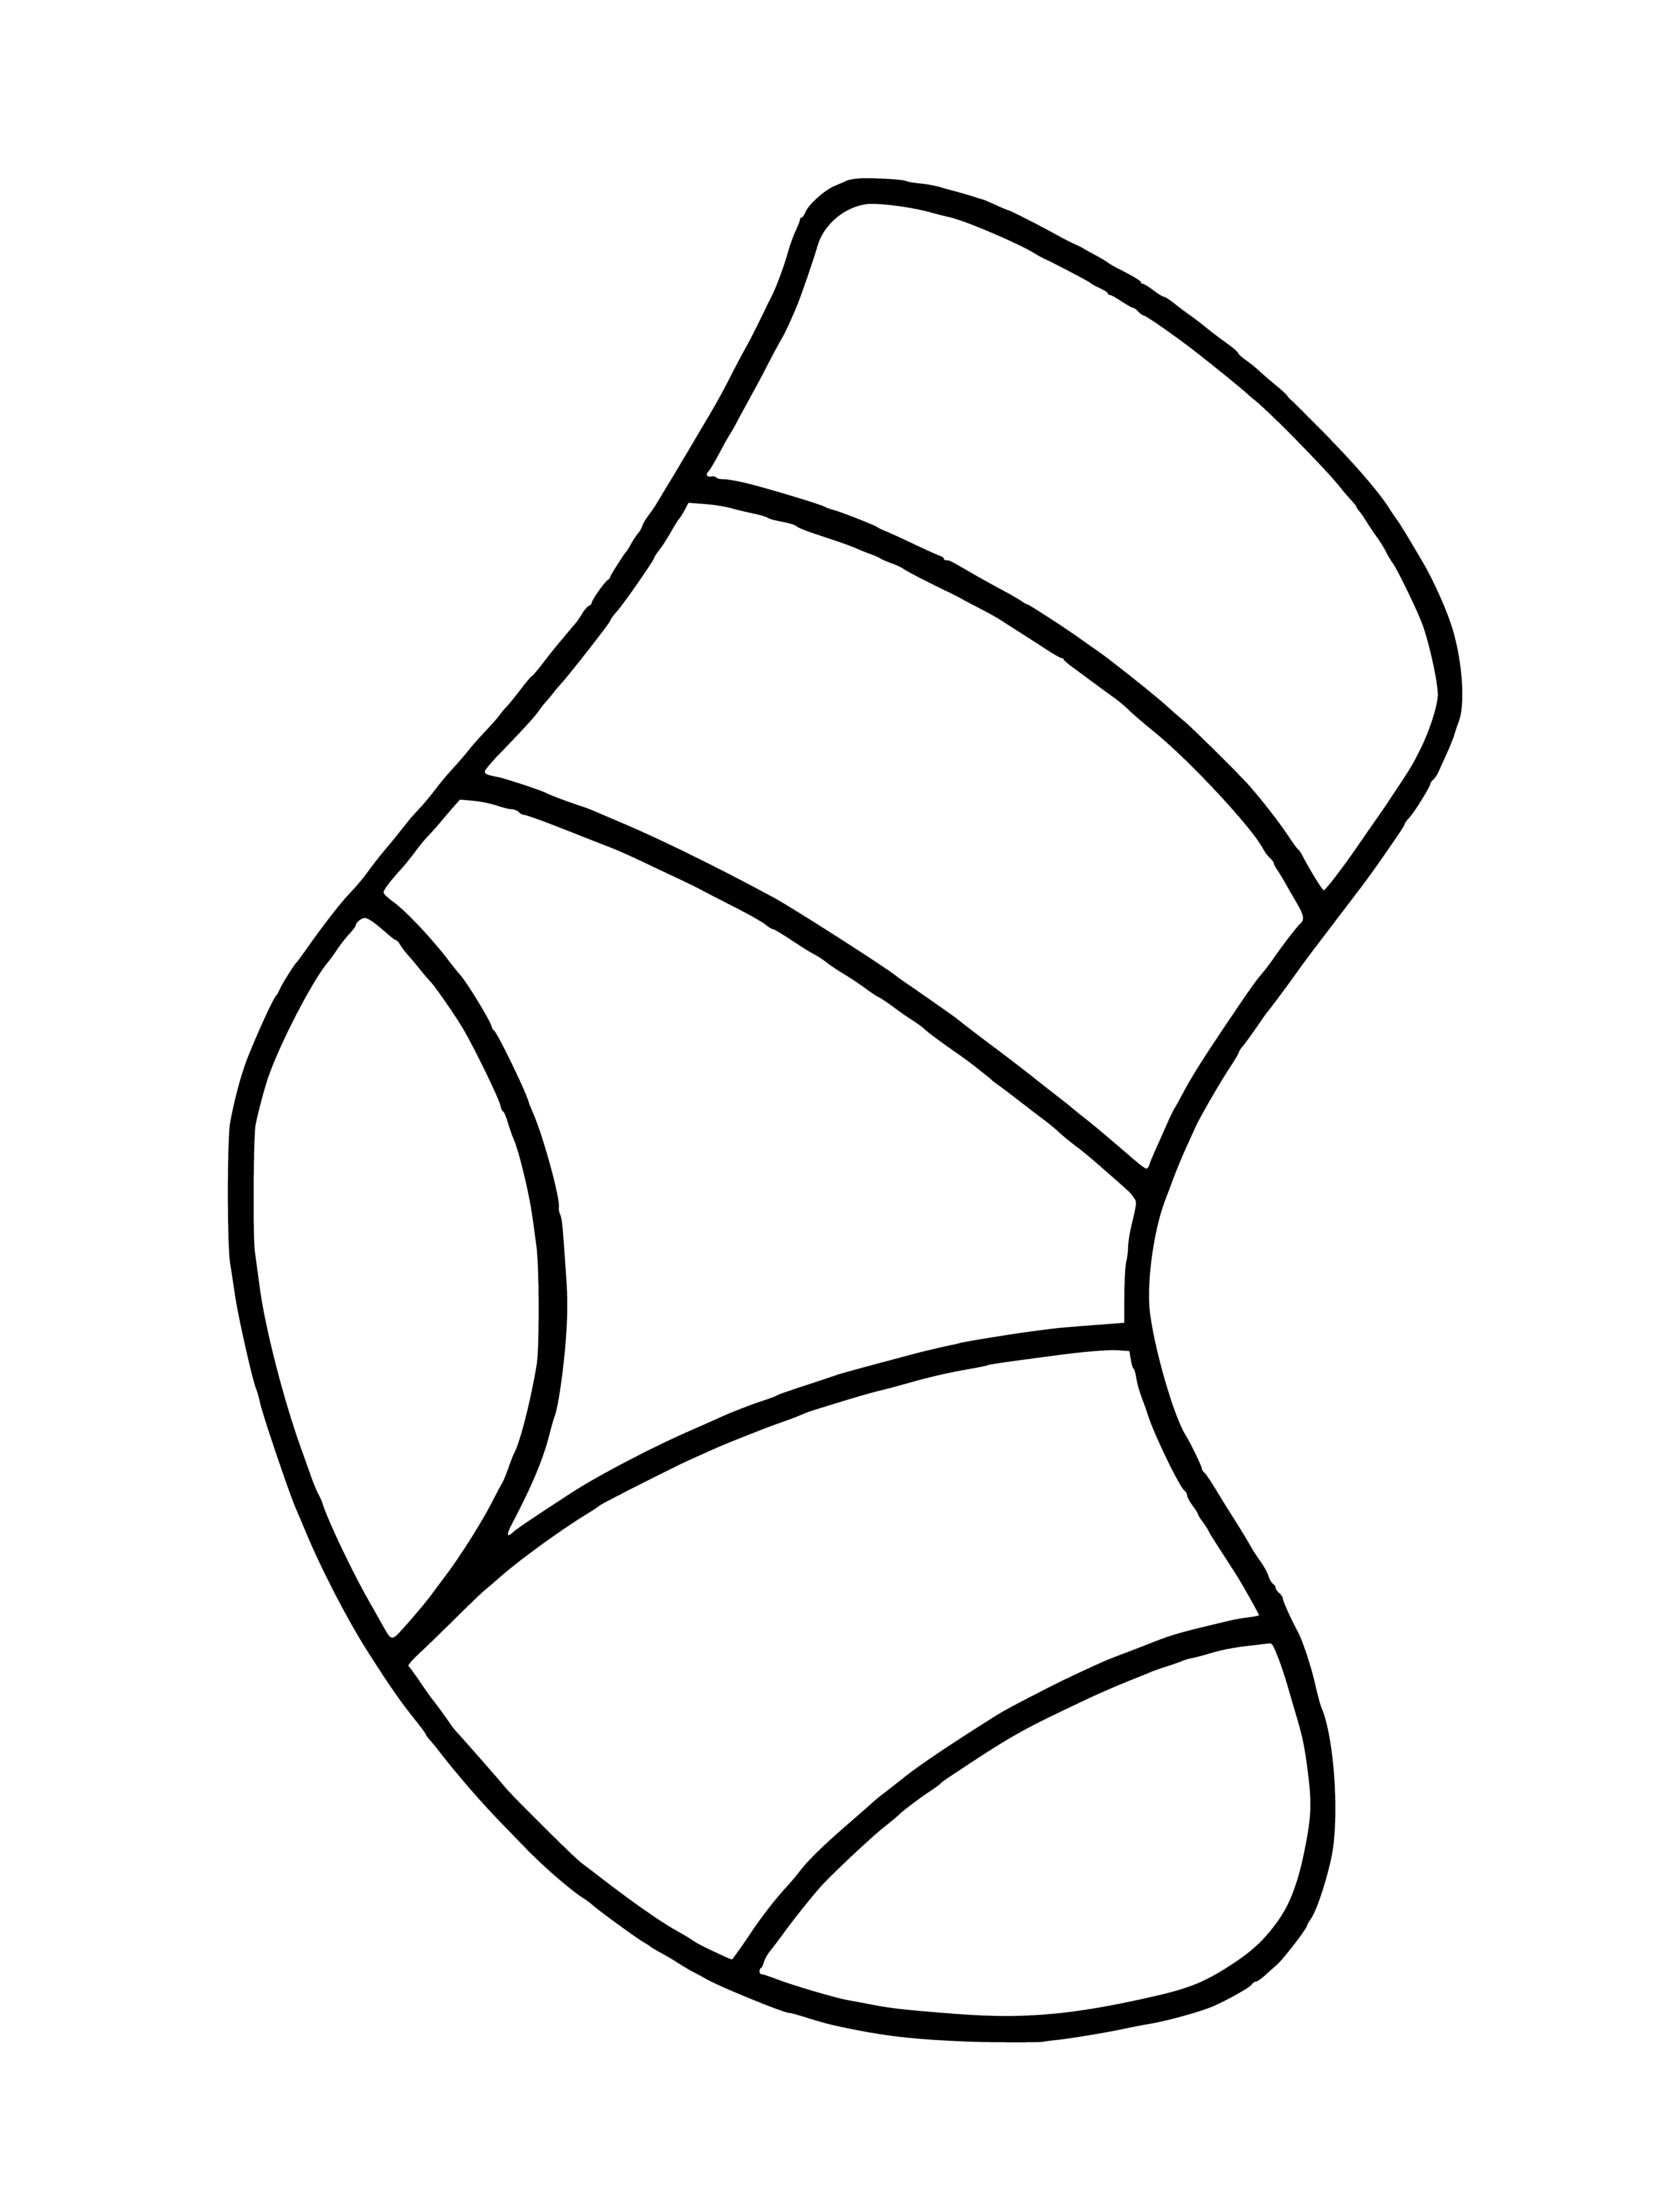 Sock coloring page